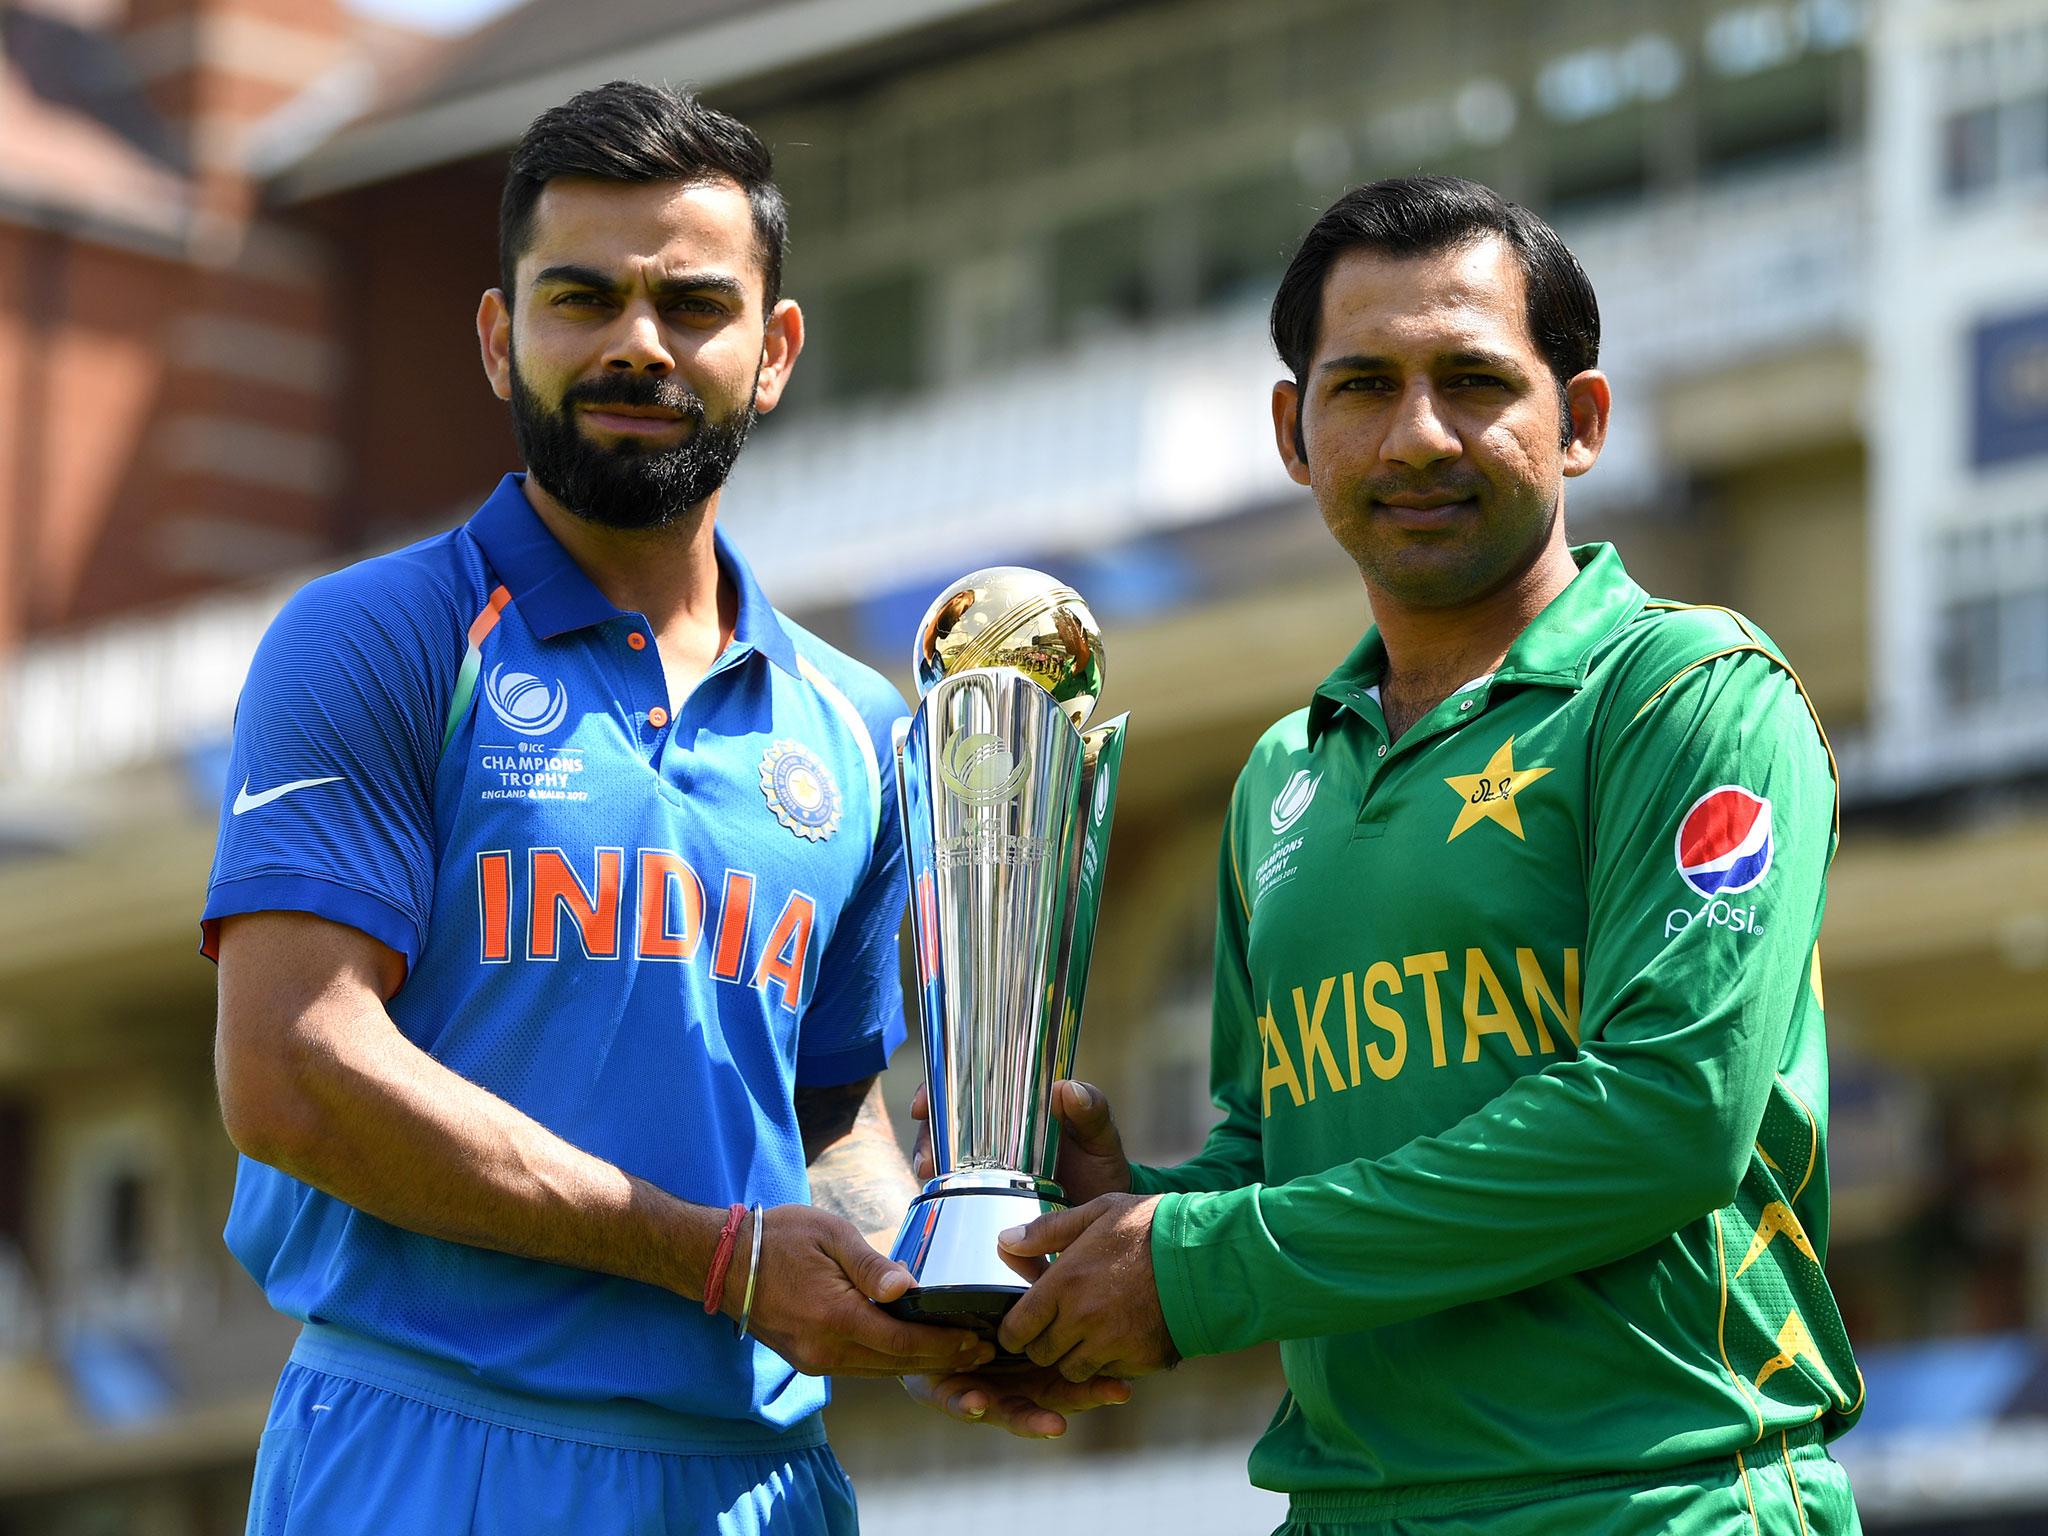 India and Pakistan meet in the final of the Champions Trophy at The Oval on Sunday